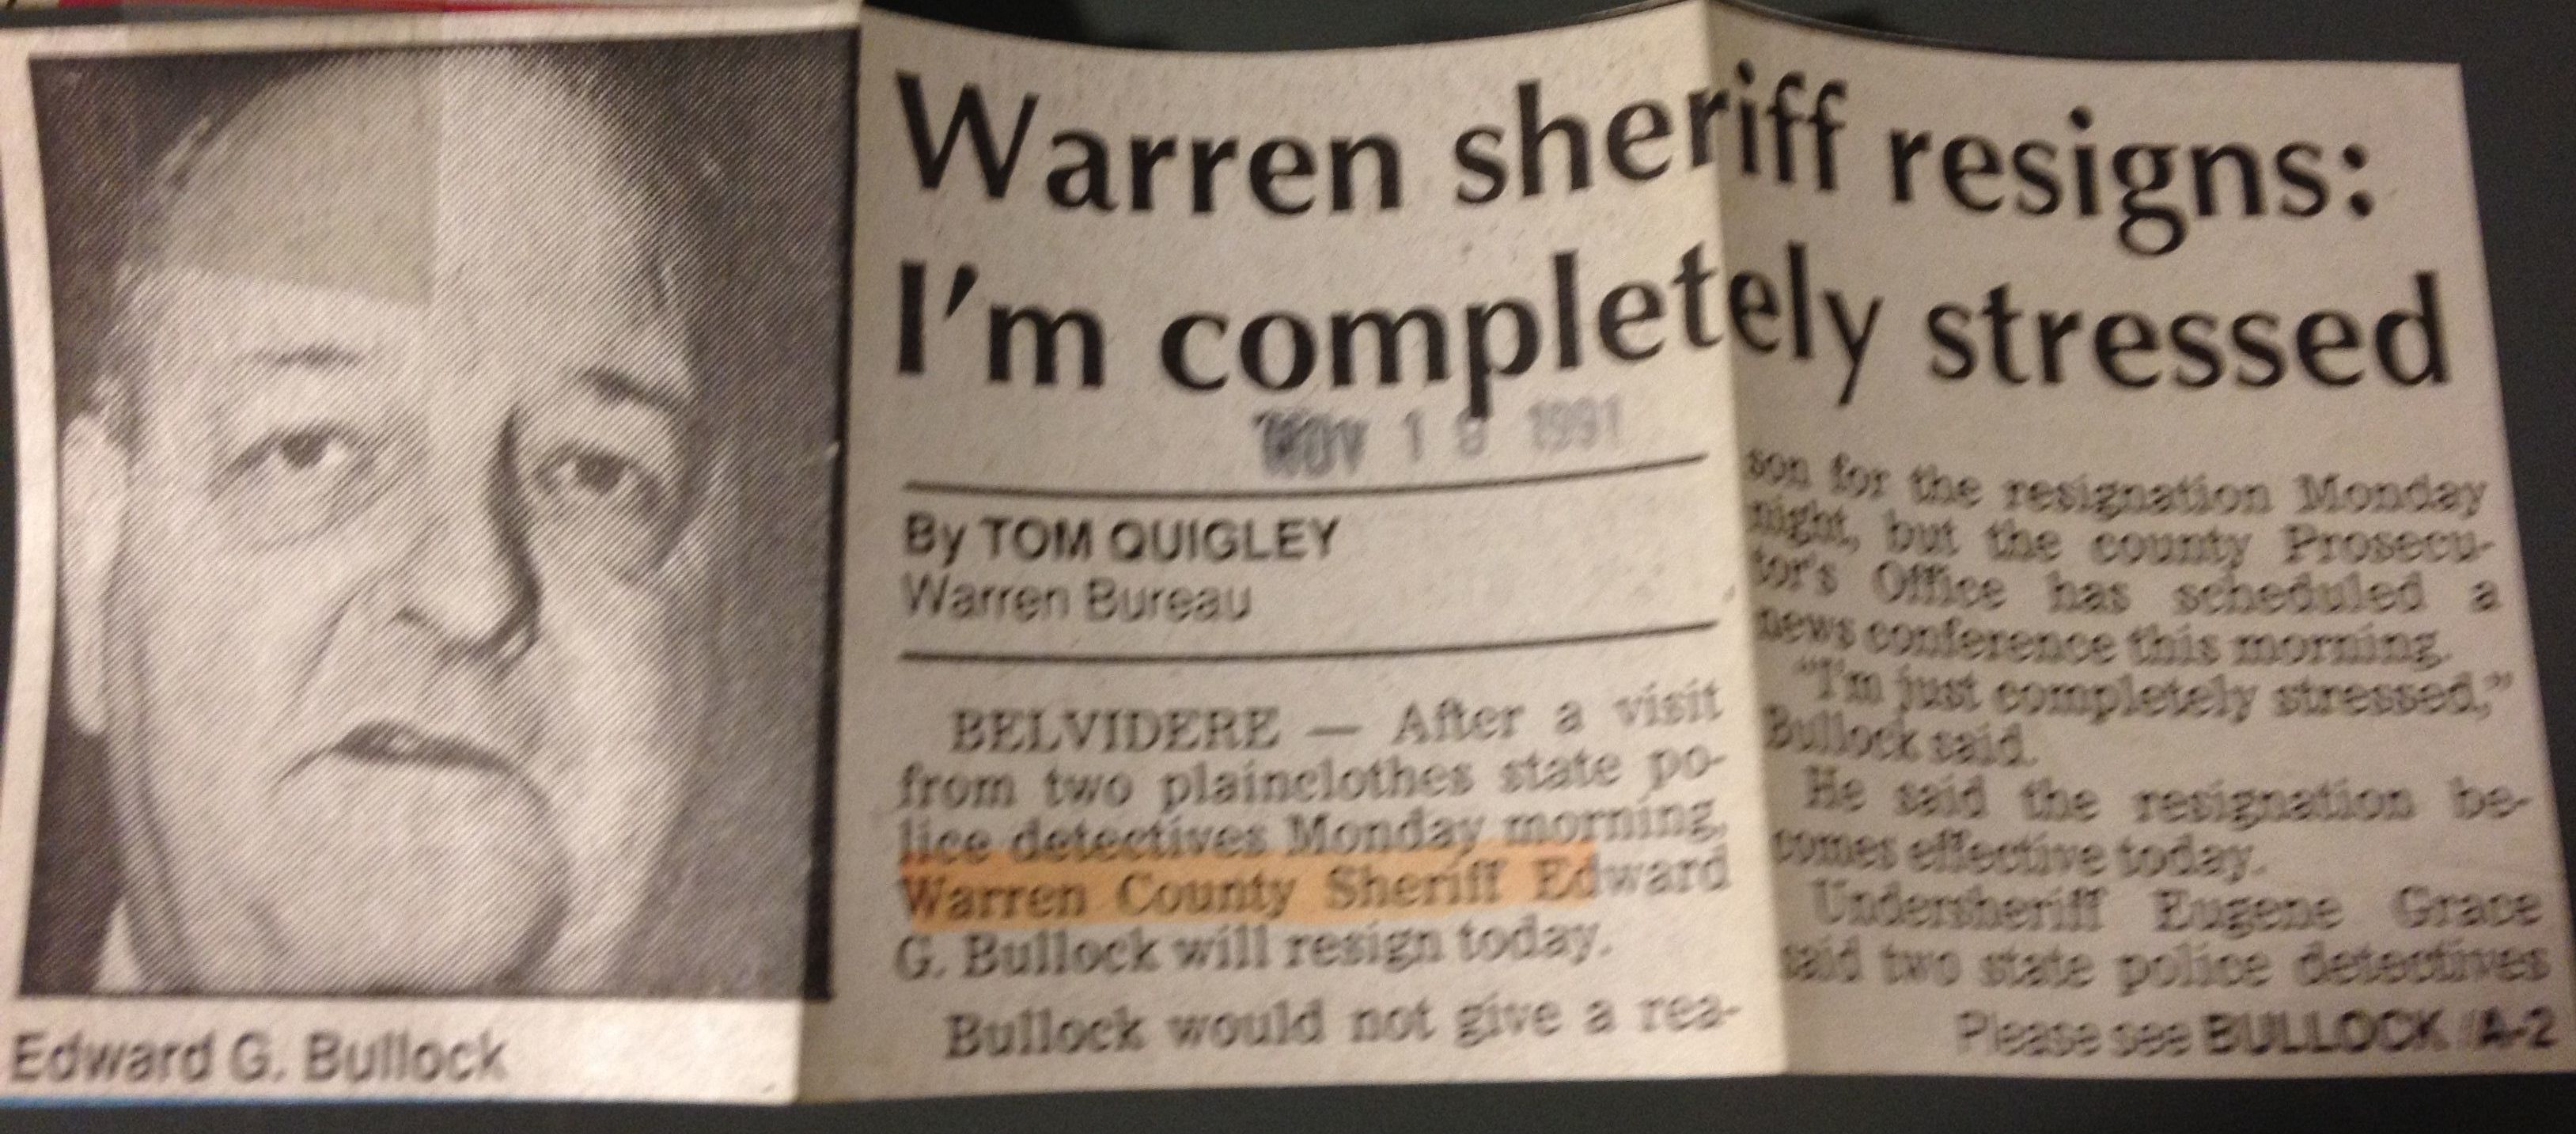 "I'm just completely stressed," was Edward Bullock's explanation for his resignation as Warren County's sheriff in November 1991. For months, rumors swirled about the reason until it was announced in March 1992 that he was the subject of a state police sting operation in which he tried to curry sexual favors from a trooper posing as a sexually abused teenaged boy.